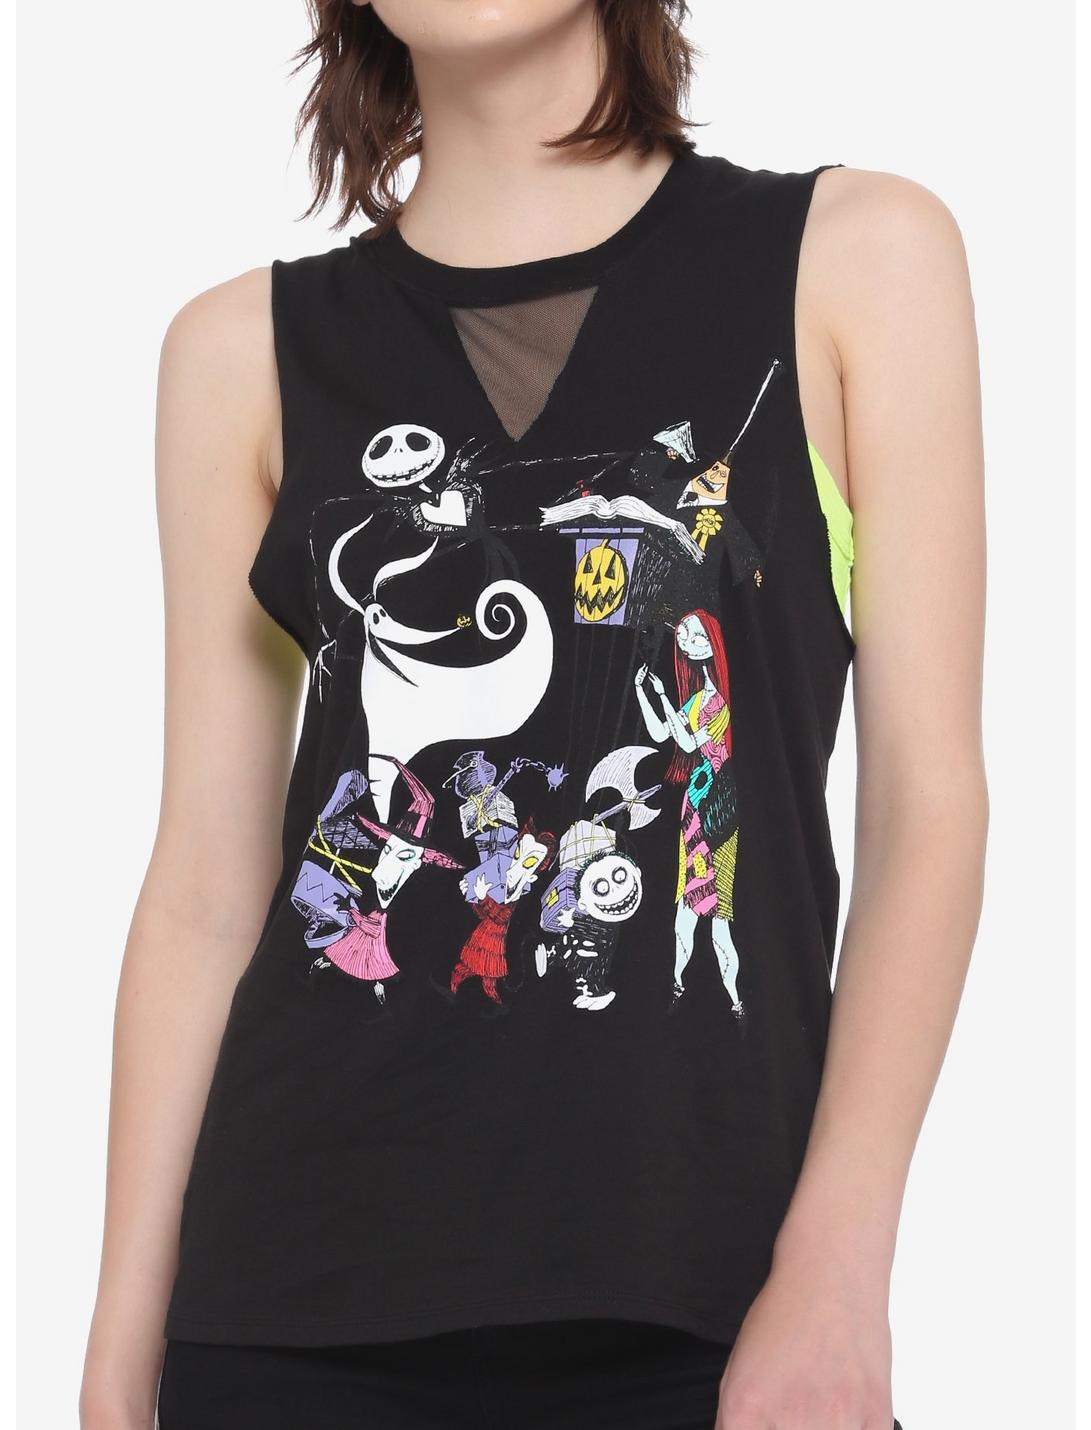 The Nightmare Before Christmas Group Mesh Insert Girls Muscle Top, MULTI, hi-res